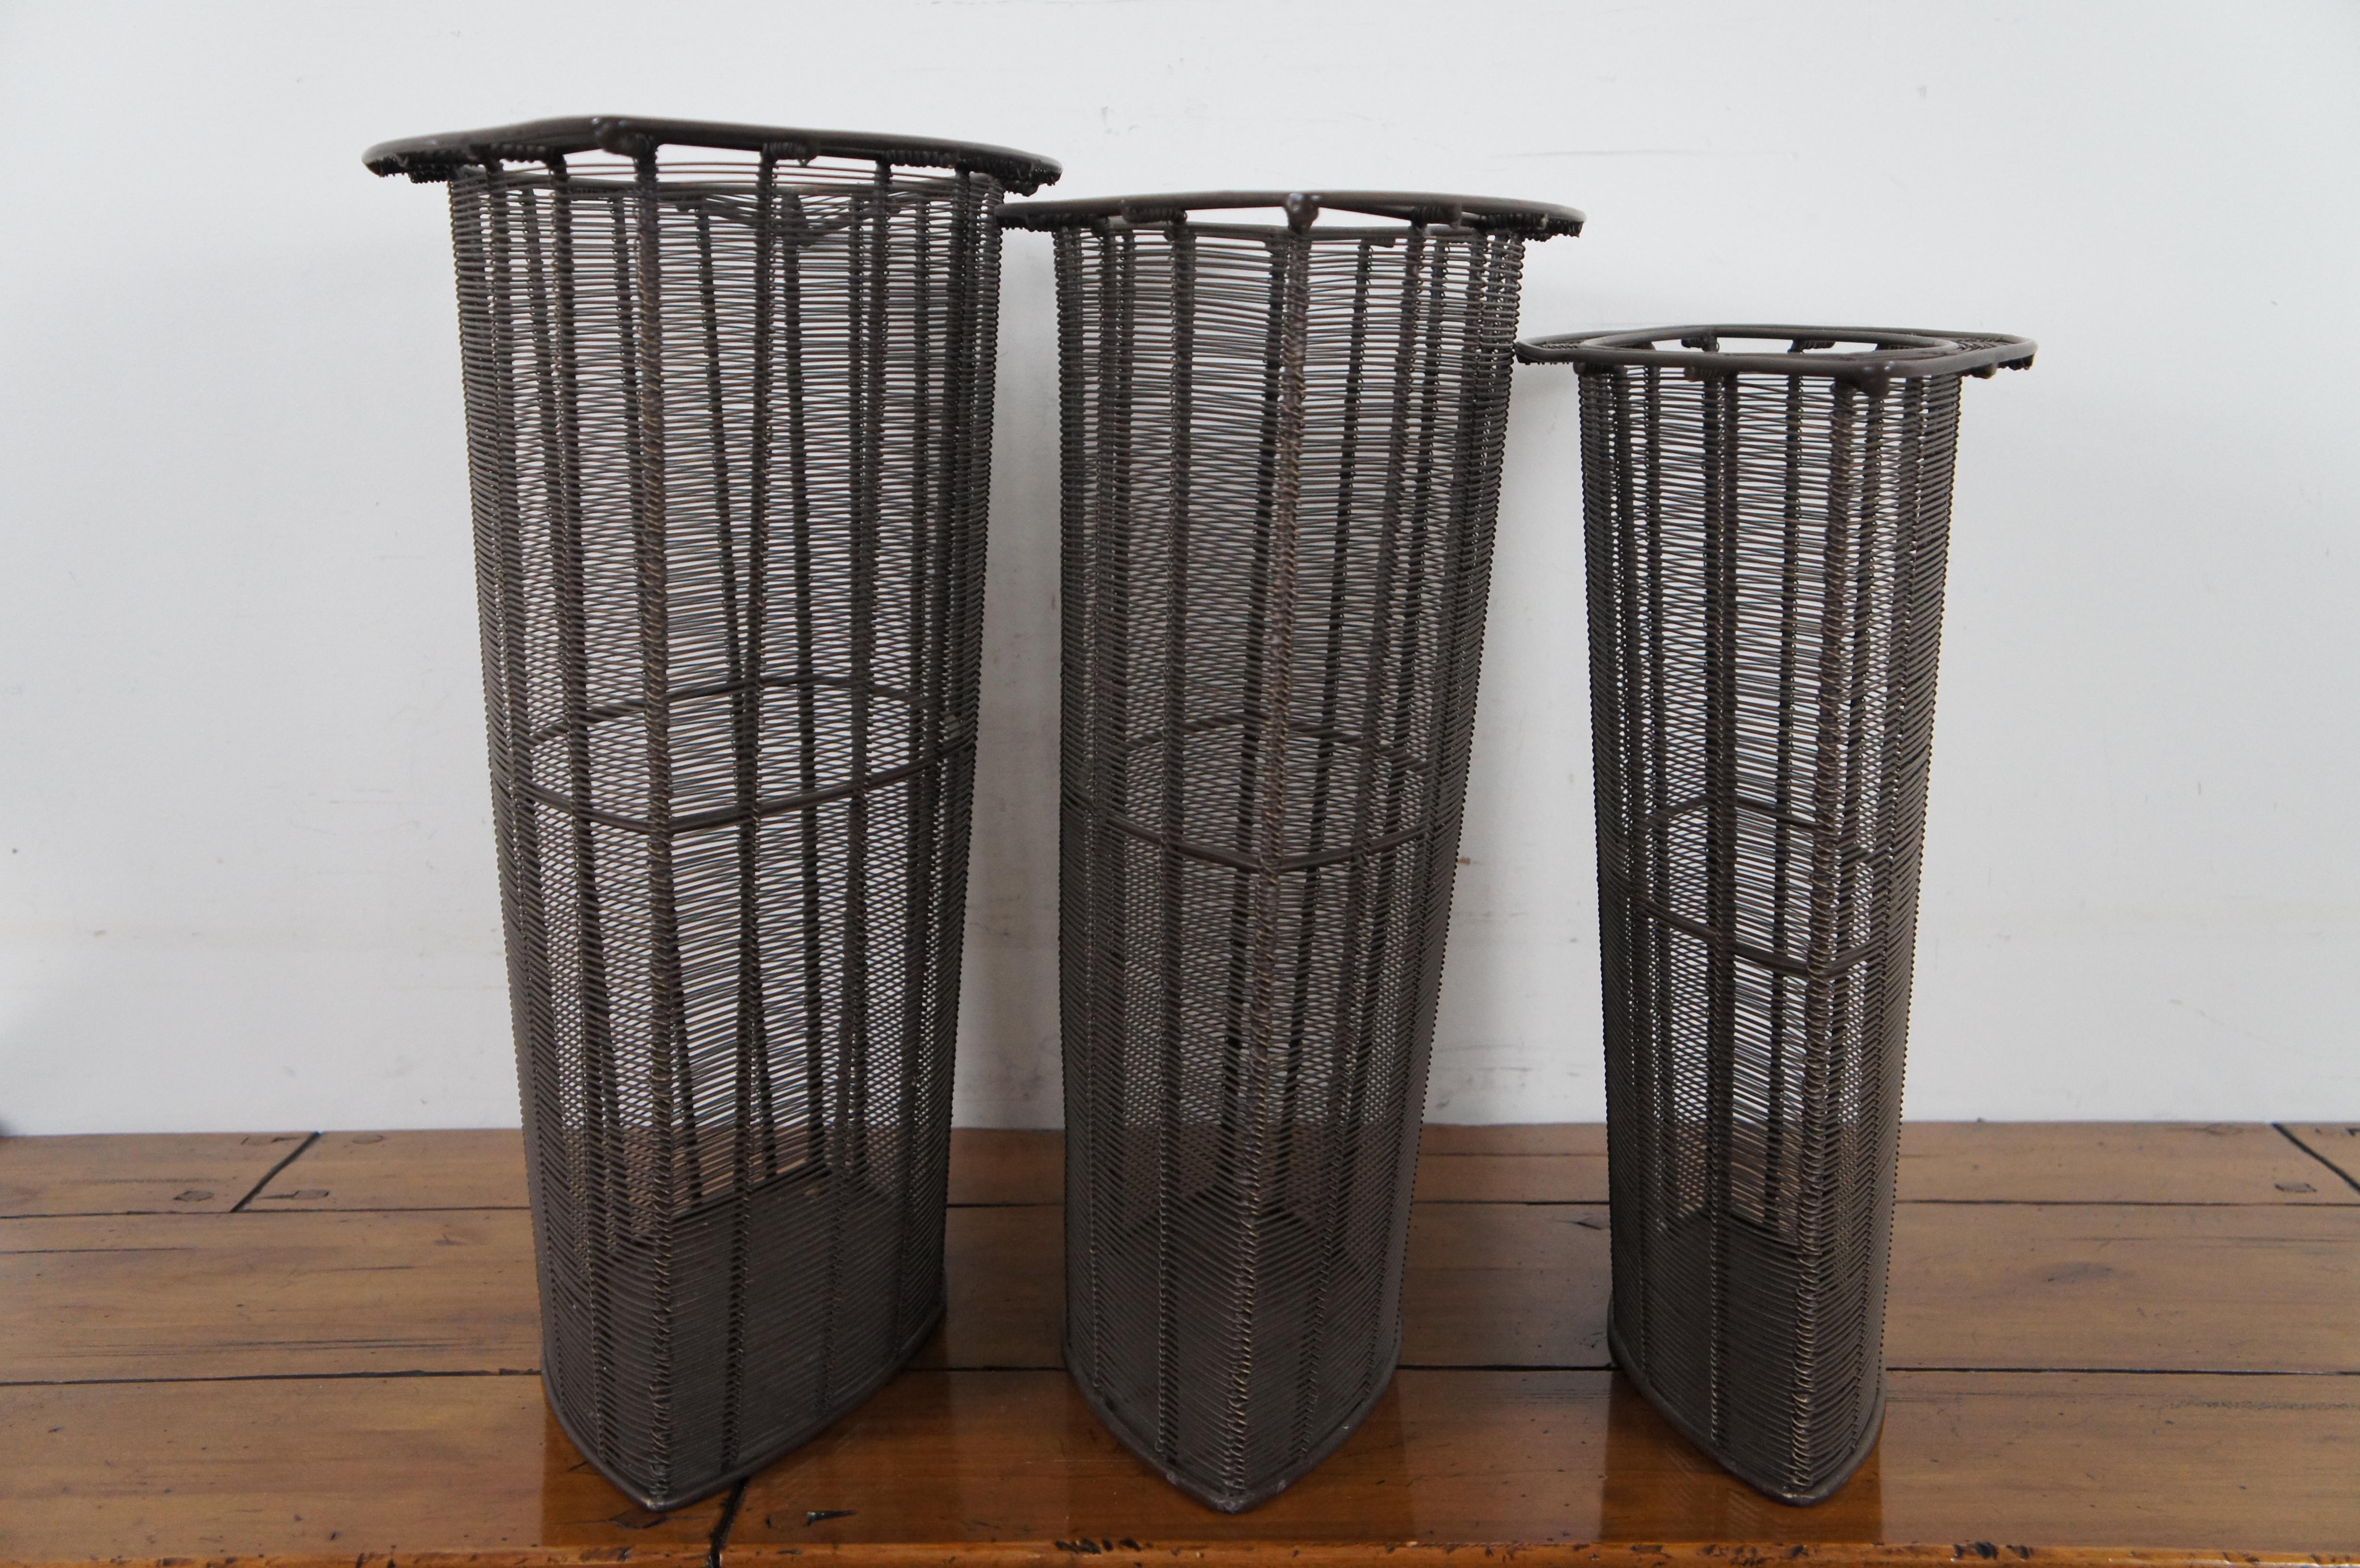 3 Vintage Interlude Home Heavy Wire Nesting Waste Baskets Trash Cans In Good Condition For Sale In Dayton, OH